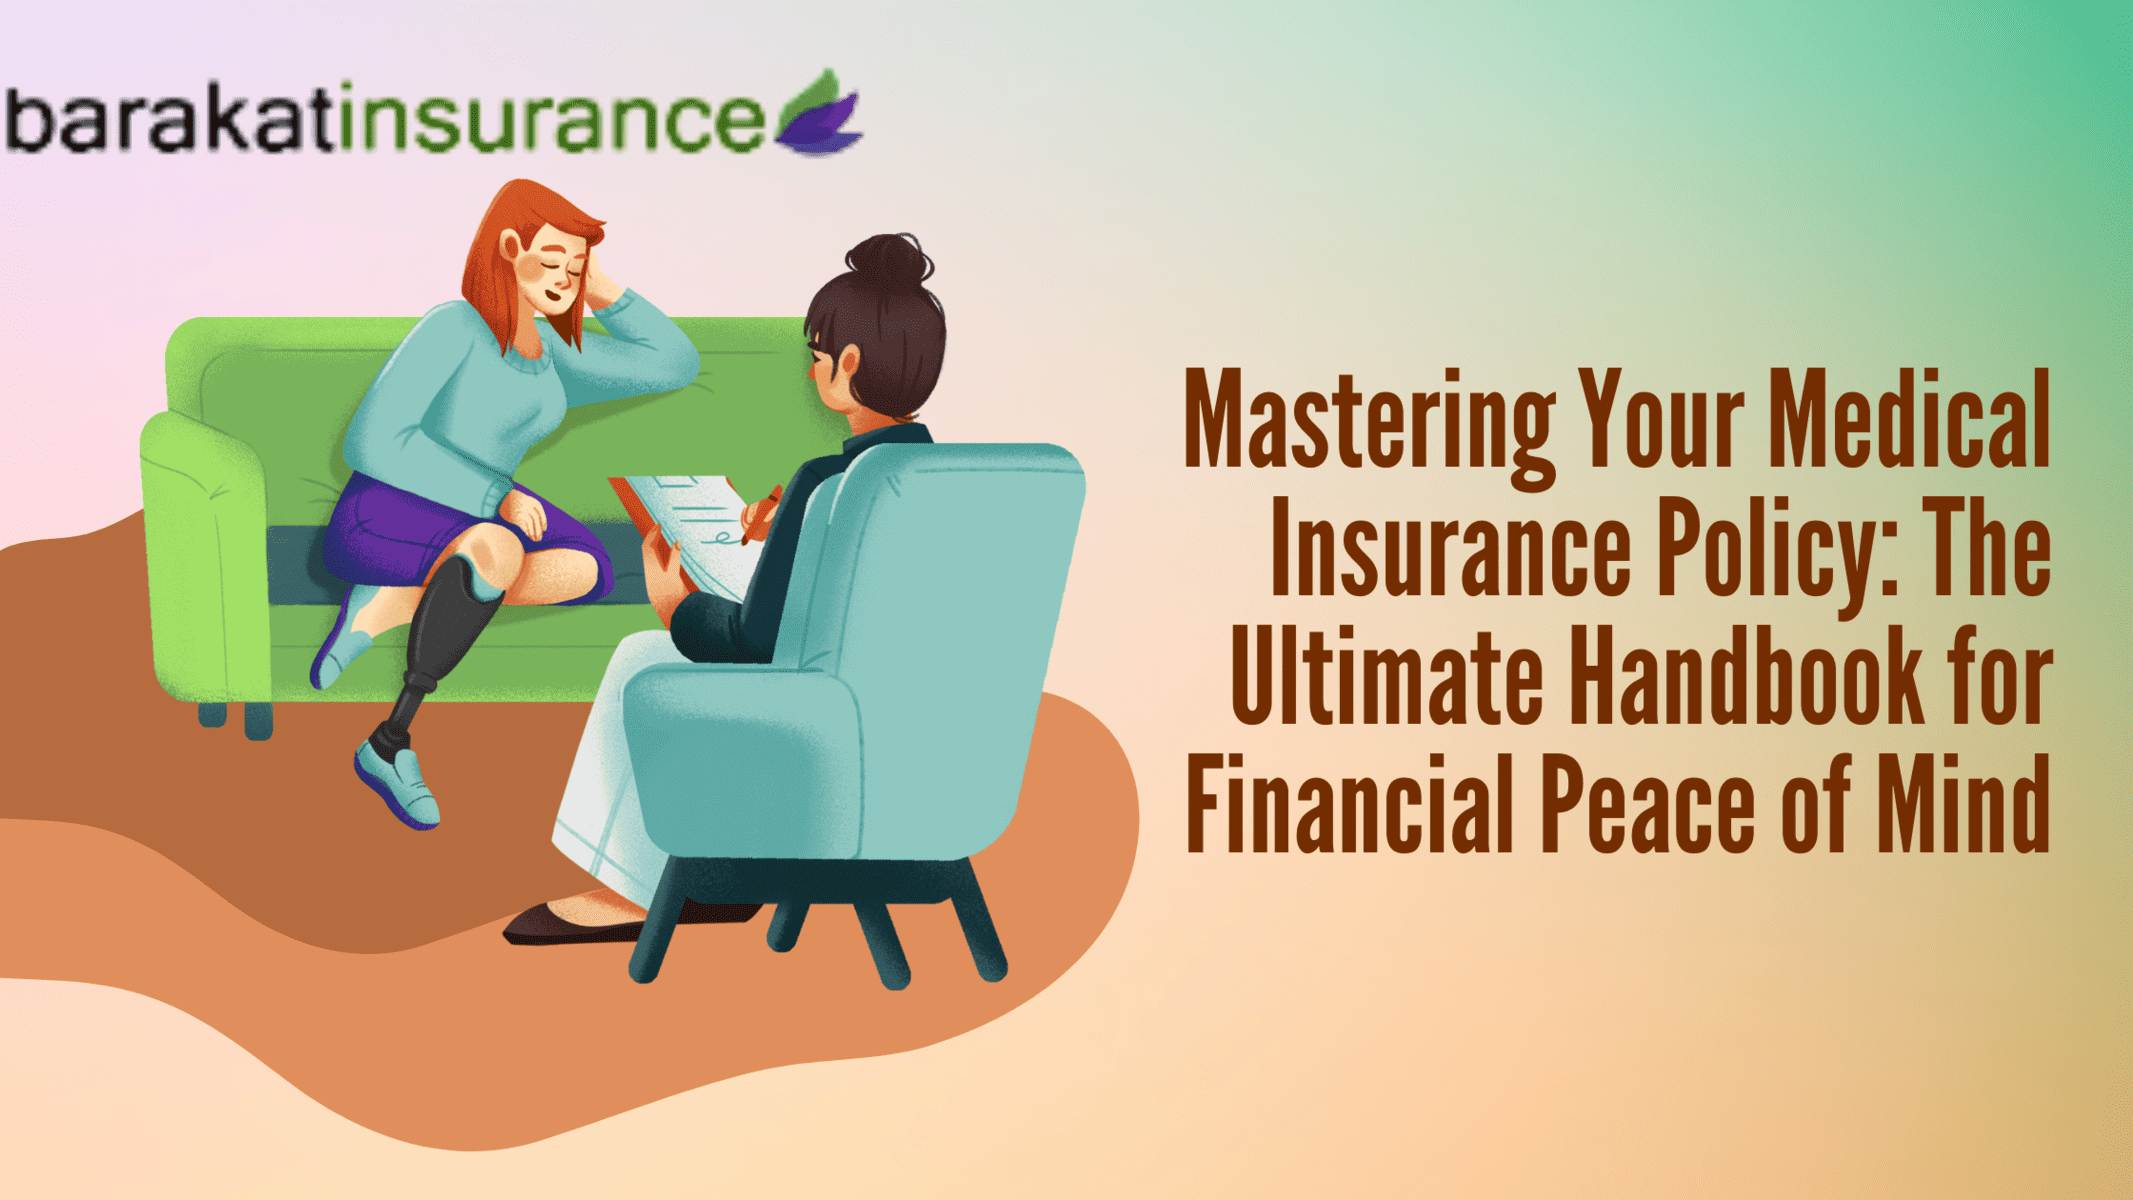 Mastering Your Medical Insurance Policy: The Ultimate Handbook for Financial Peace of Mind